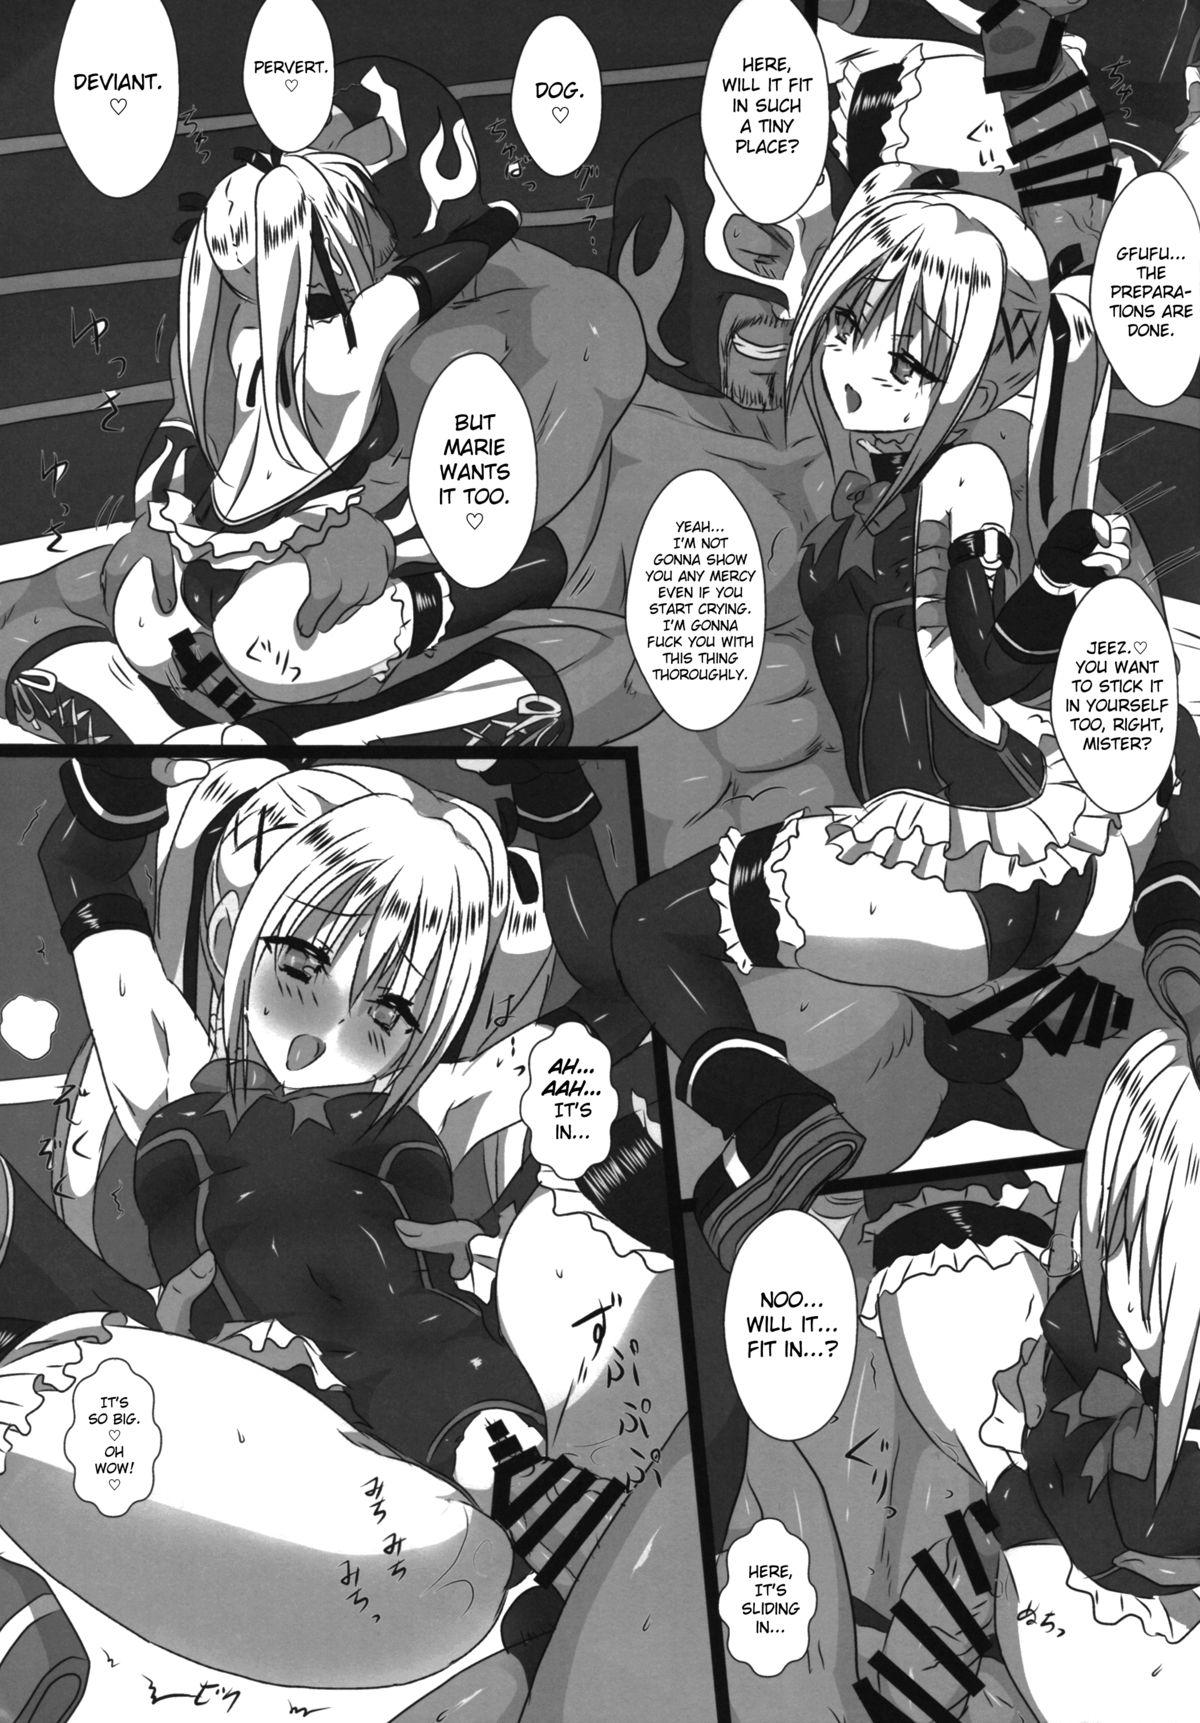 Cuckolding Koko de Shitai no ne...? | This is where you want to do it, right...? - Dead or alive Emo - Page 10